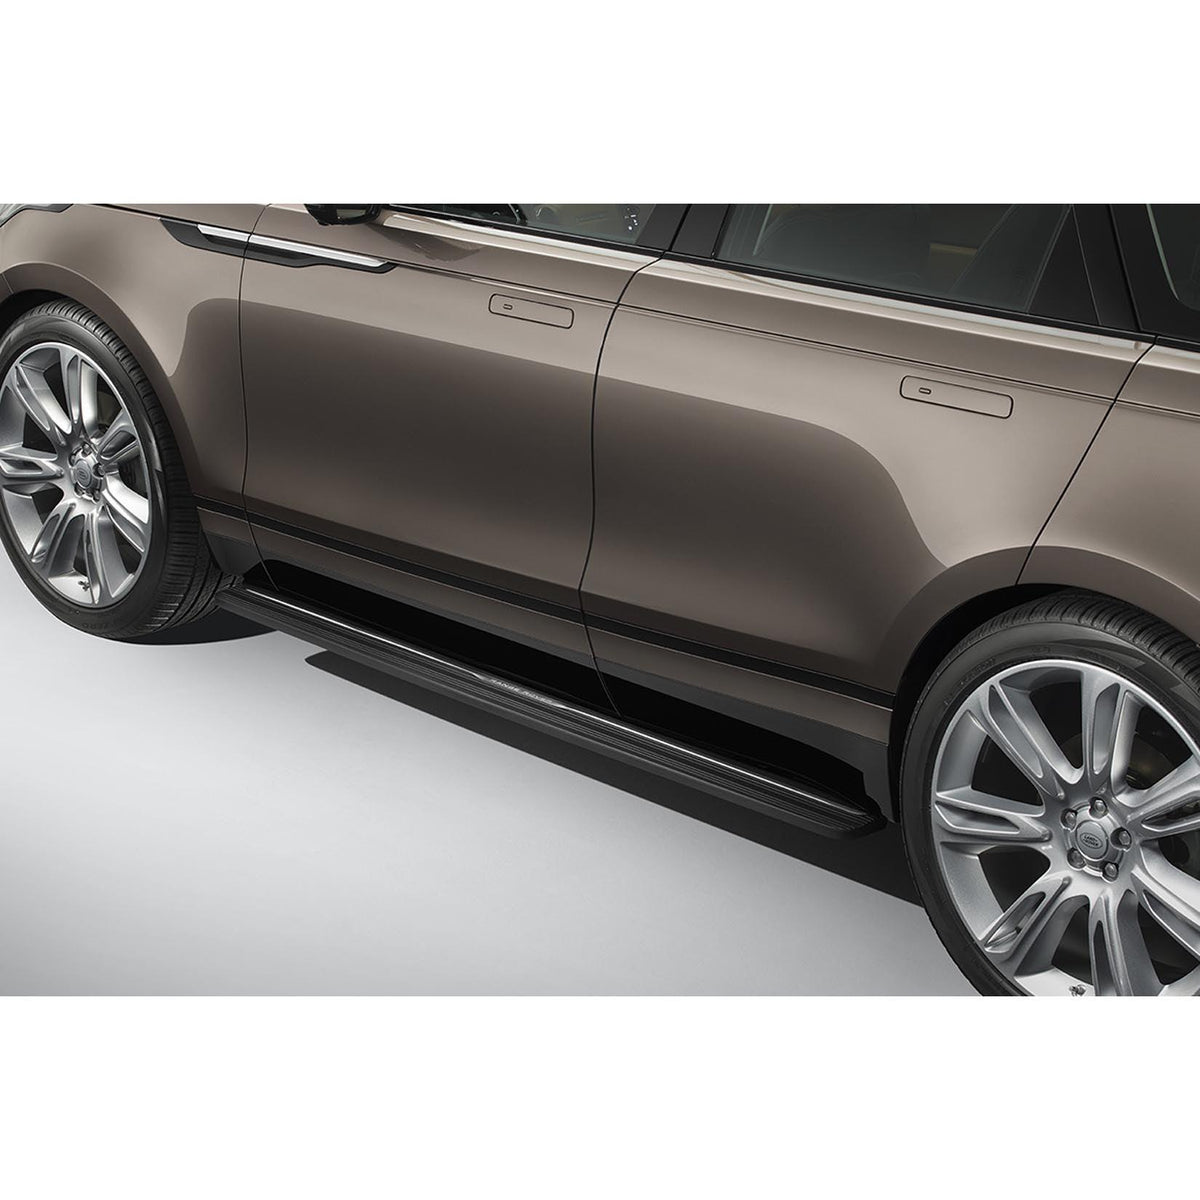 RANGE ROVER VELAR 2017 ON - L560 - ELECTRIC OEM STYLE - SIDE STEPS RUNNING BOARDS - PAIR - Storm Xccessories2